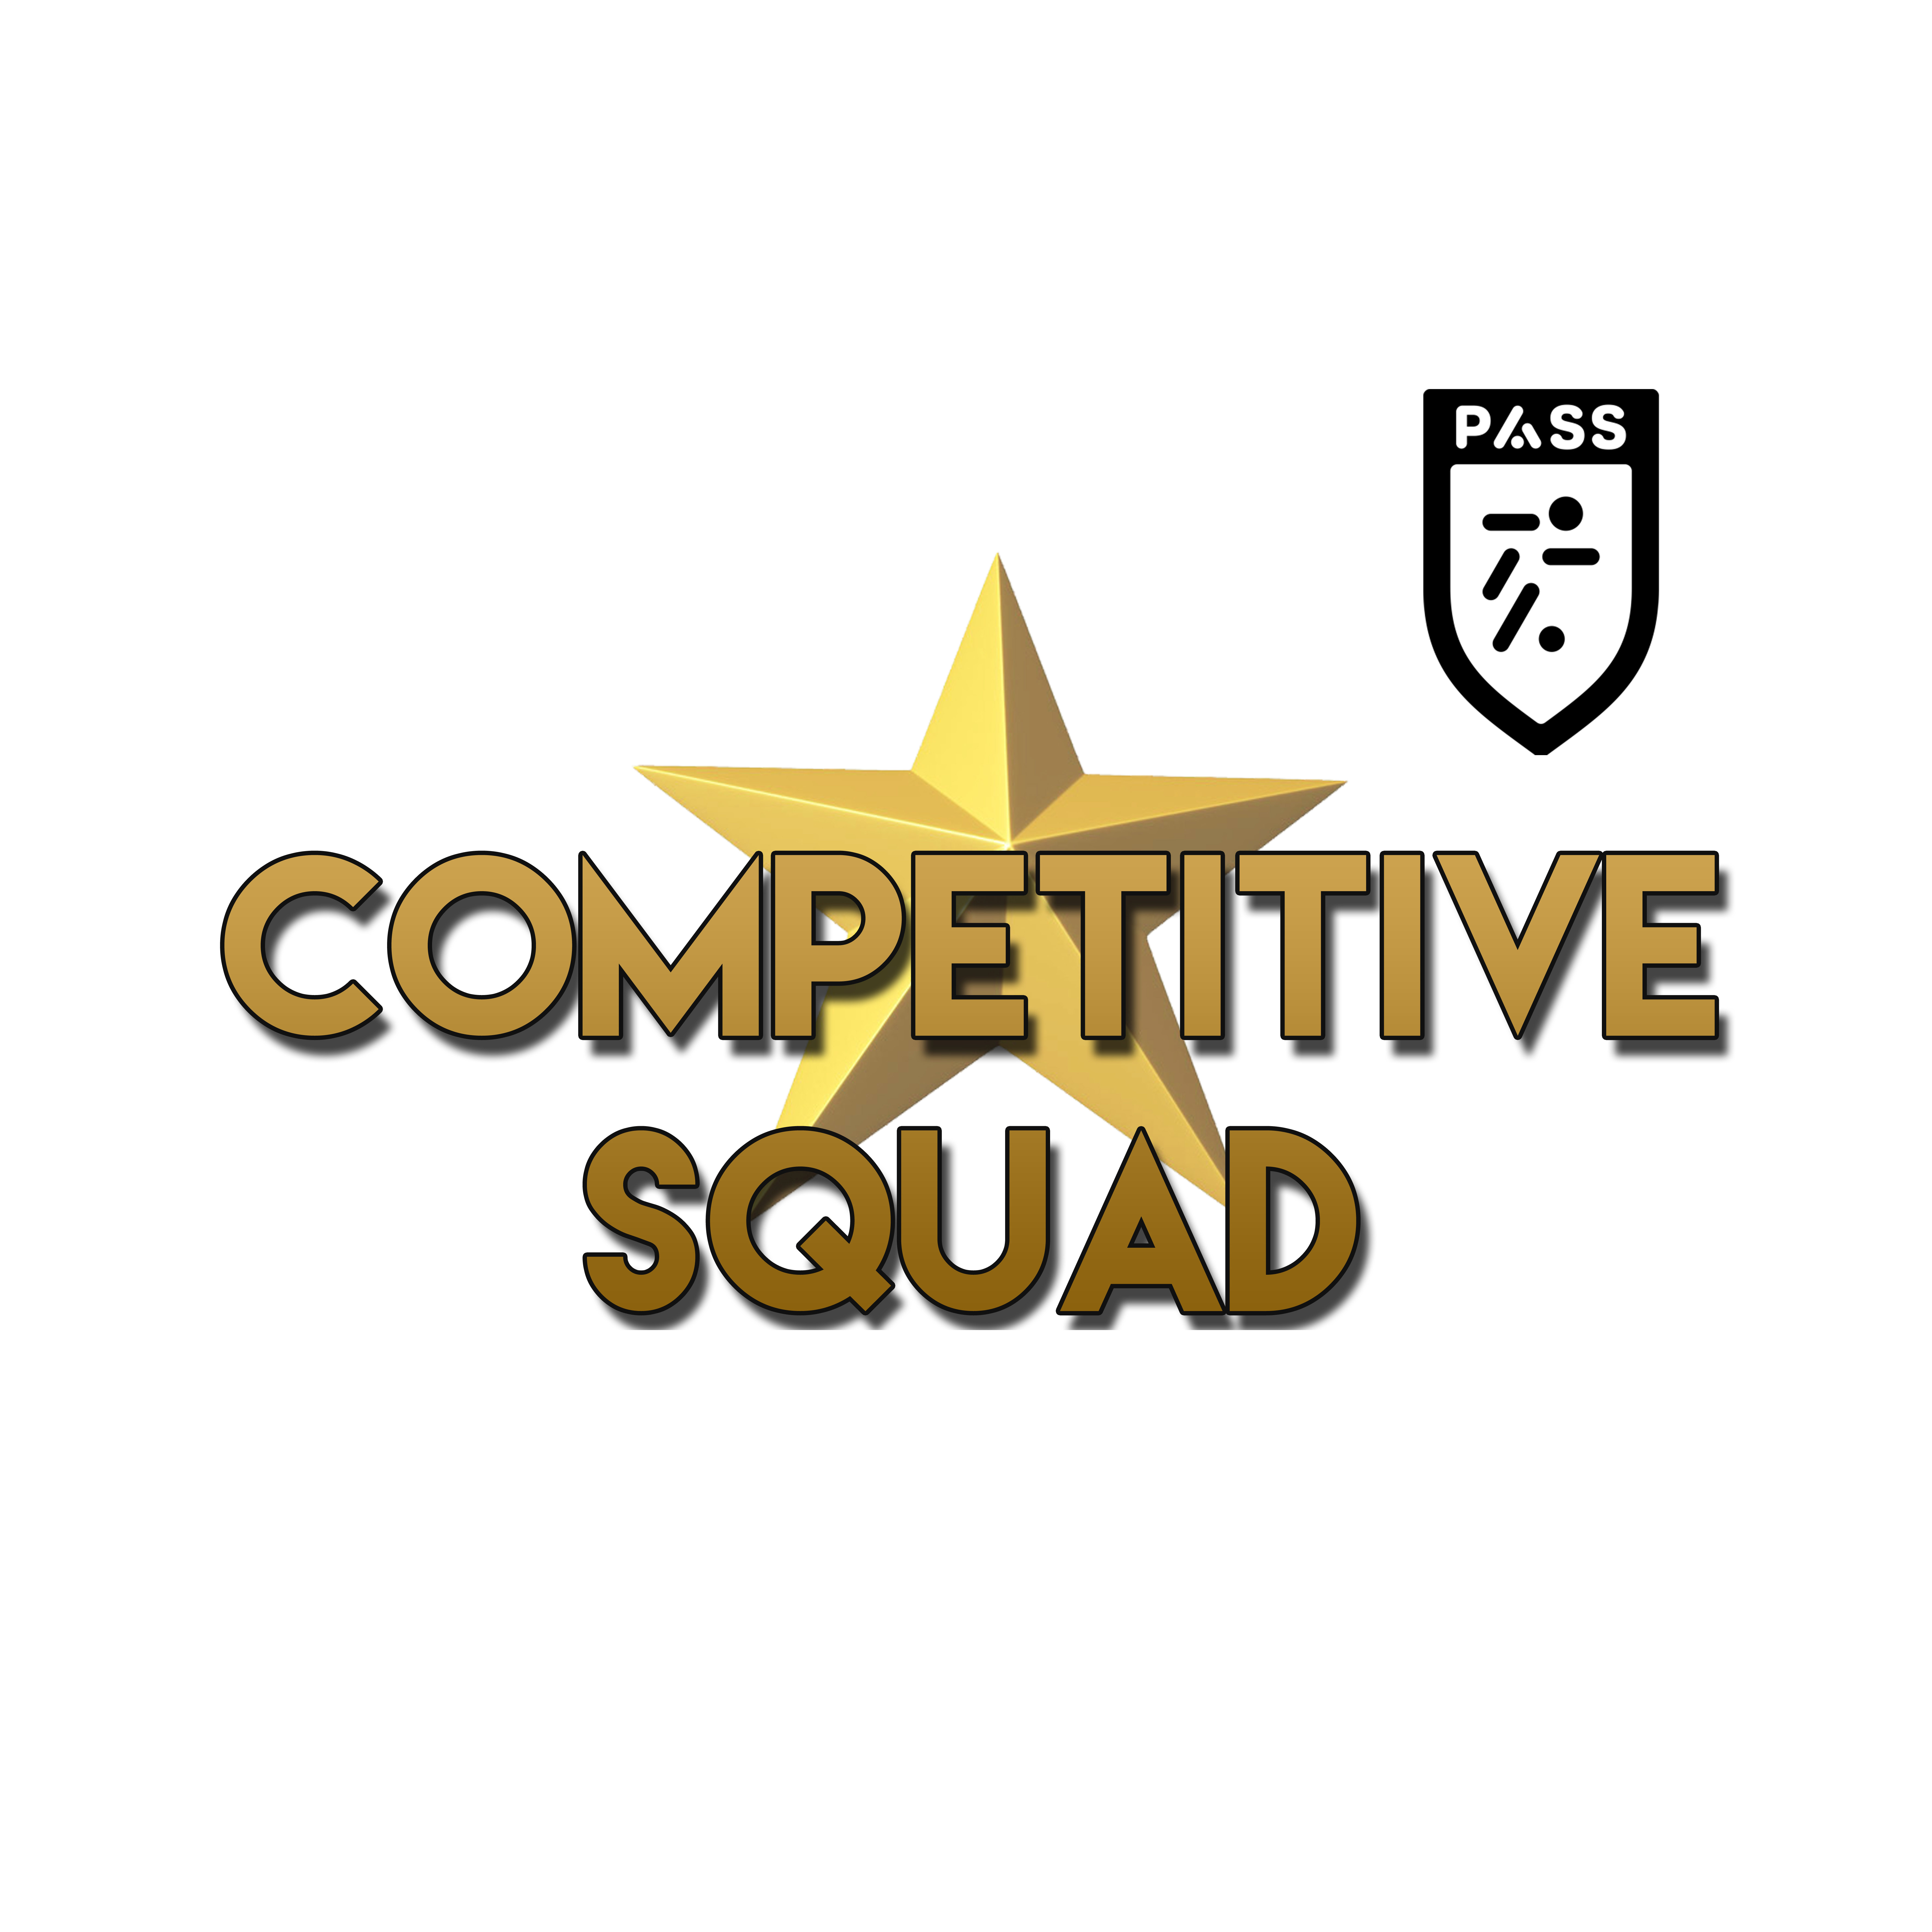 ONE DAY Development/Competitive Squad